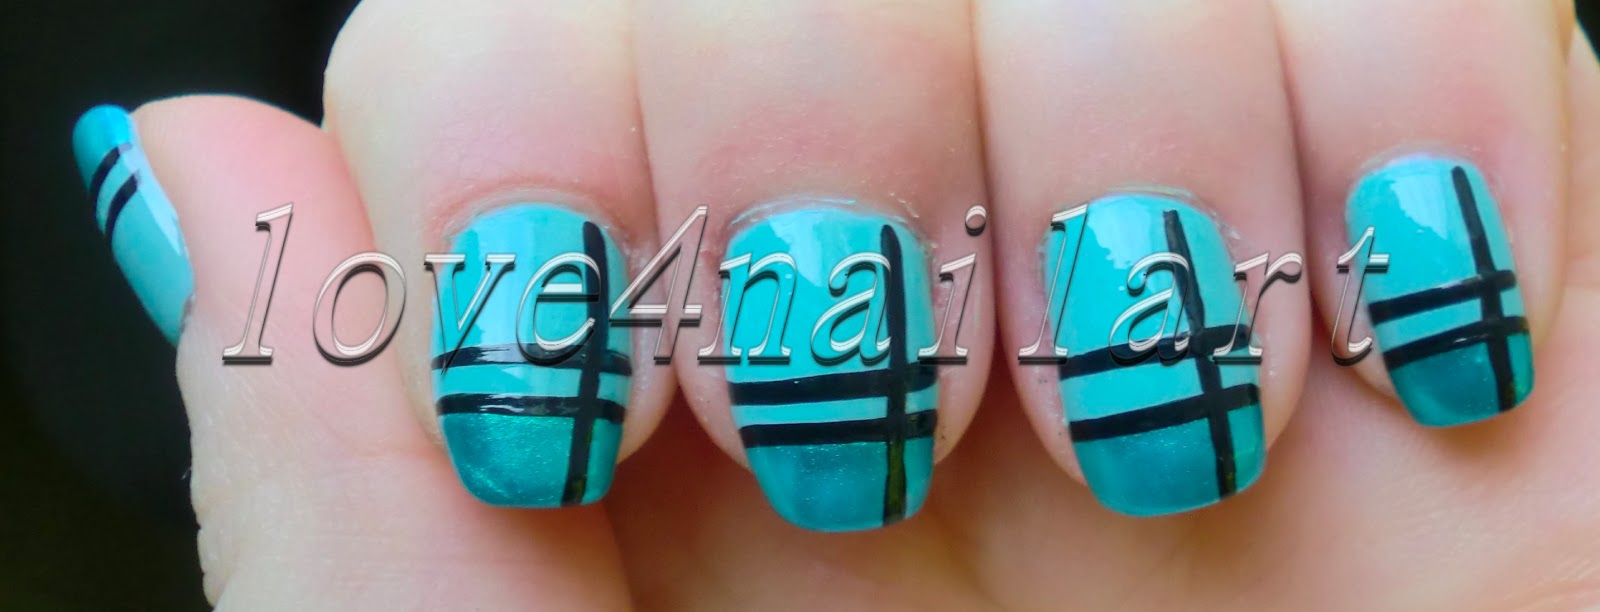 7. Turquoise and Brown Striped Nail Art - wide 2